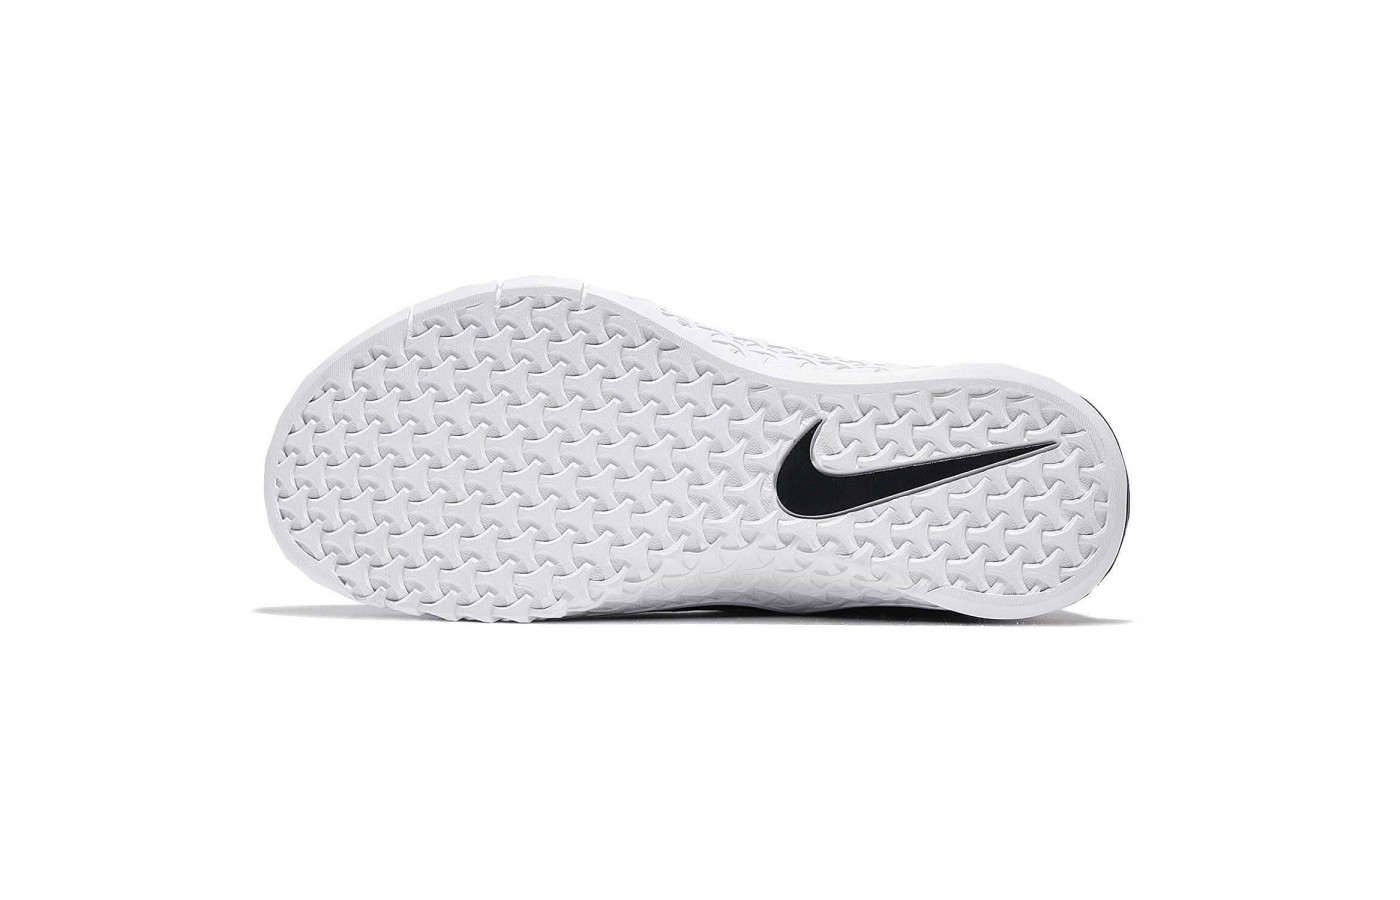 The Nike Metcon 3 features a grippy outsole made of rubber